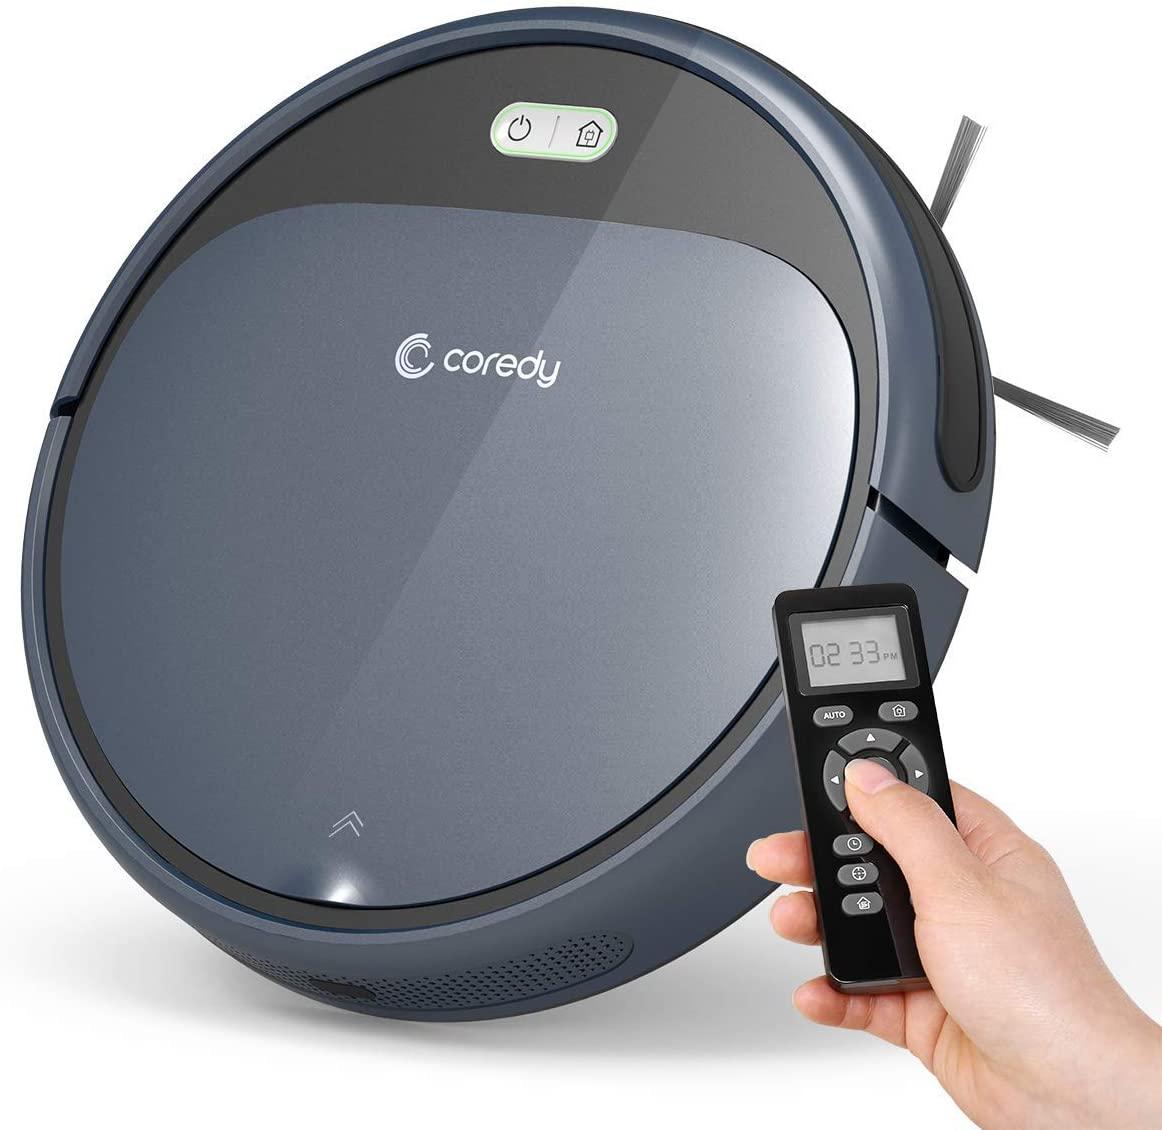 Coredy Robot Vacuum Cleanerr for $113.99 Shipped